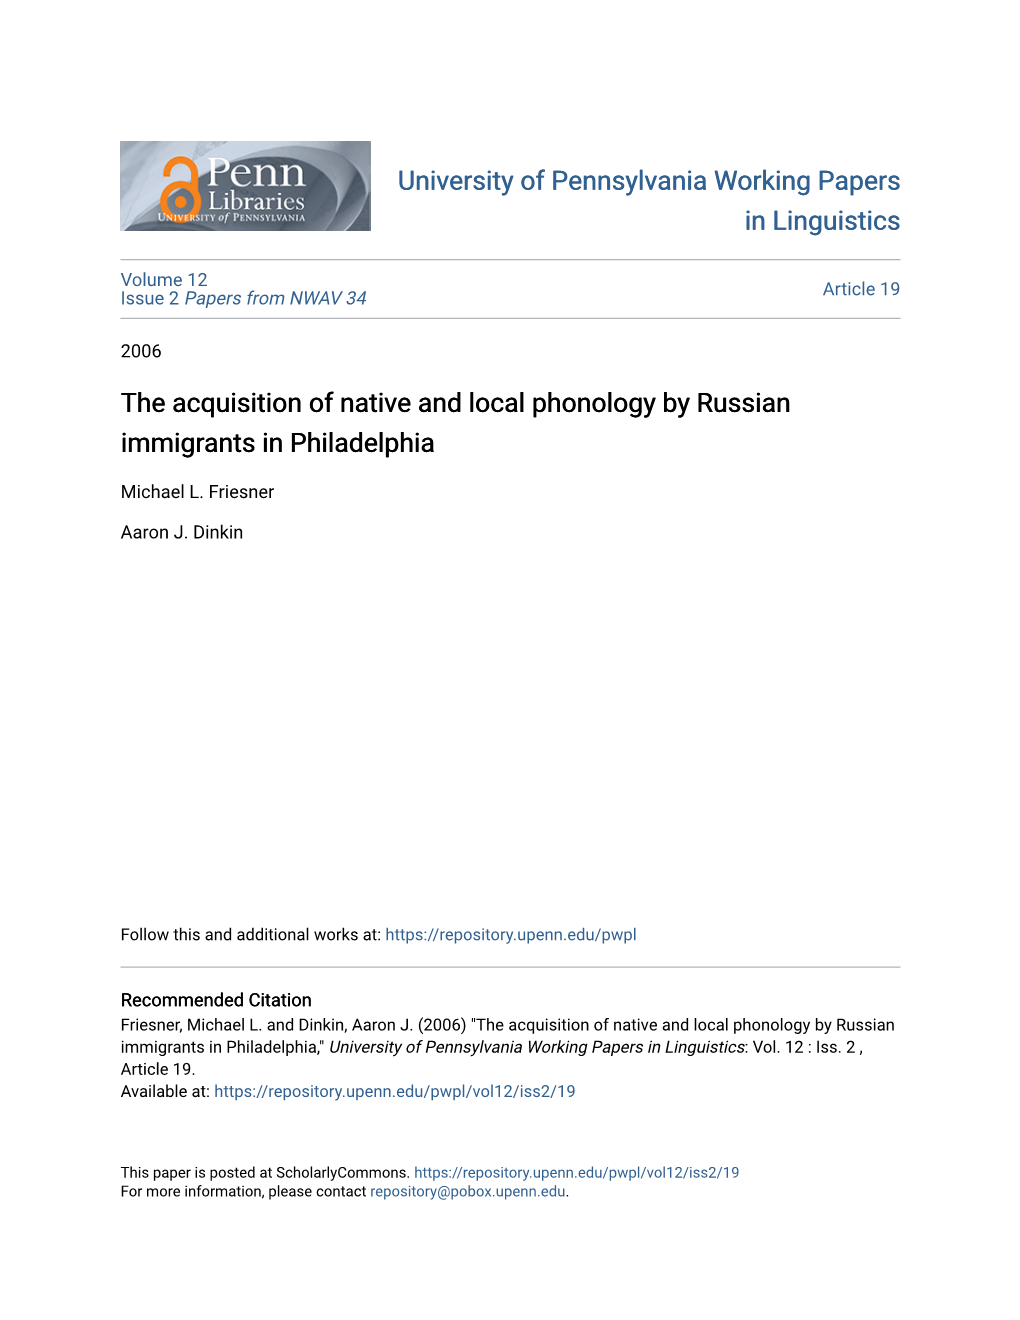 The Acquisition of Native and Local Phonology by Russian Immigrants in Philadelphia